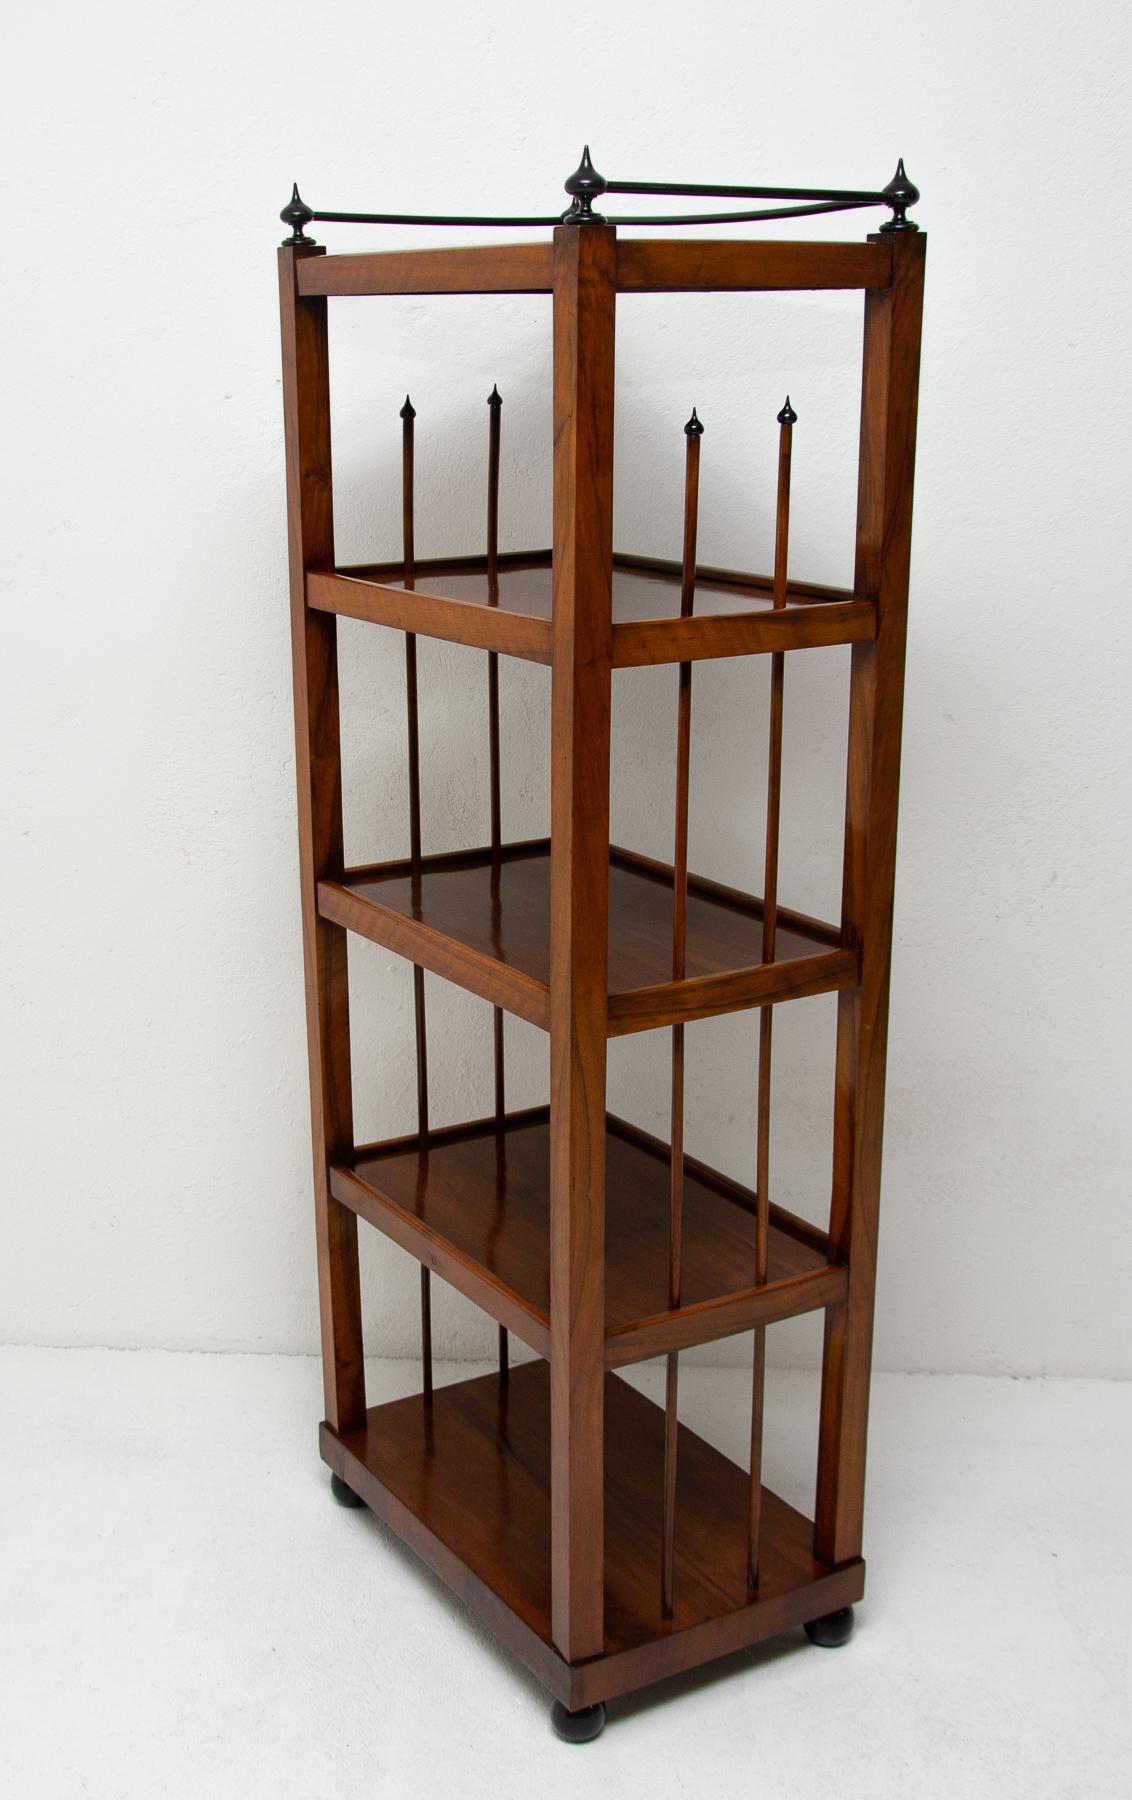 A beautiful etagere/shelf from early Biedermeier, in walnut veneer, ebonized. It was made around 1830 in the former Austro-Hungarian monarchy. It consists of five plates and compartments, side sections are intersected by arrow-shaped bars, typical